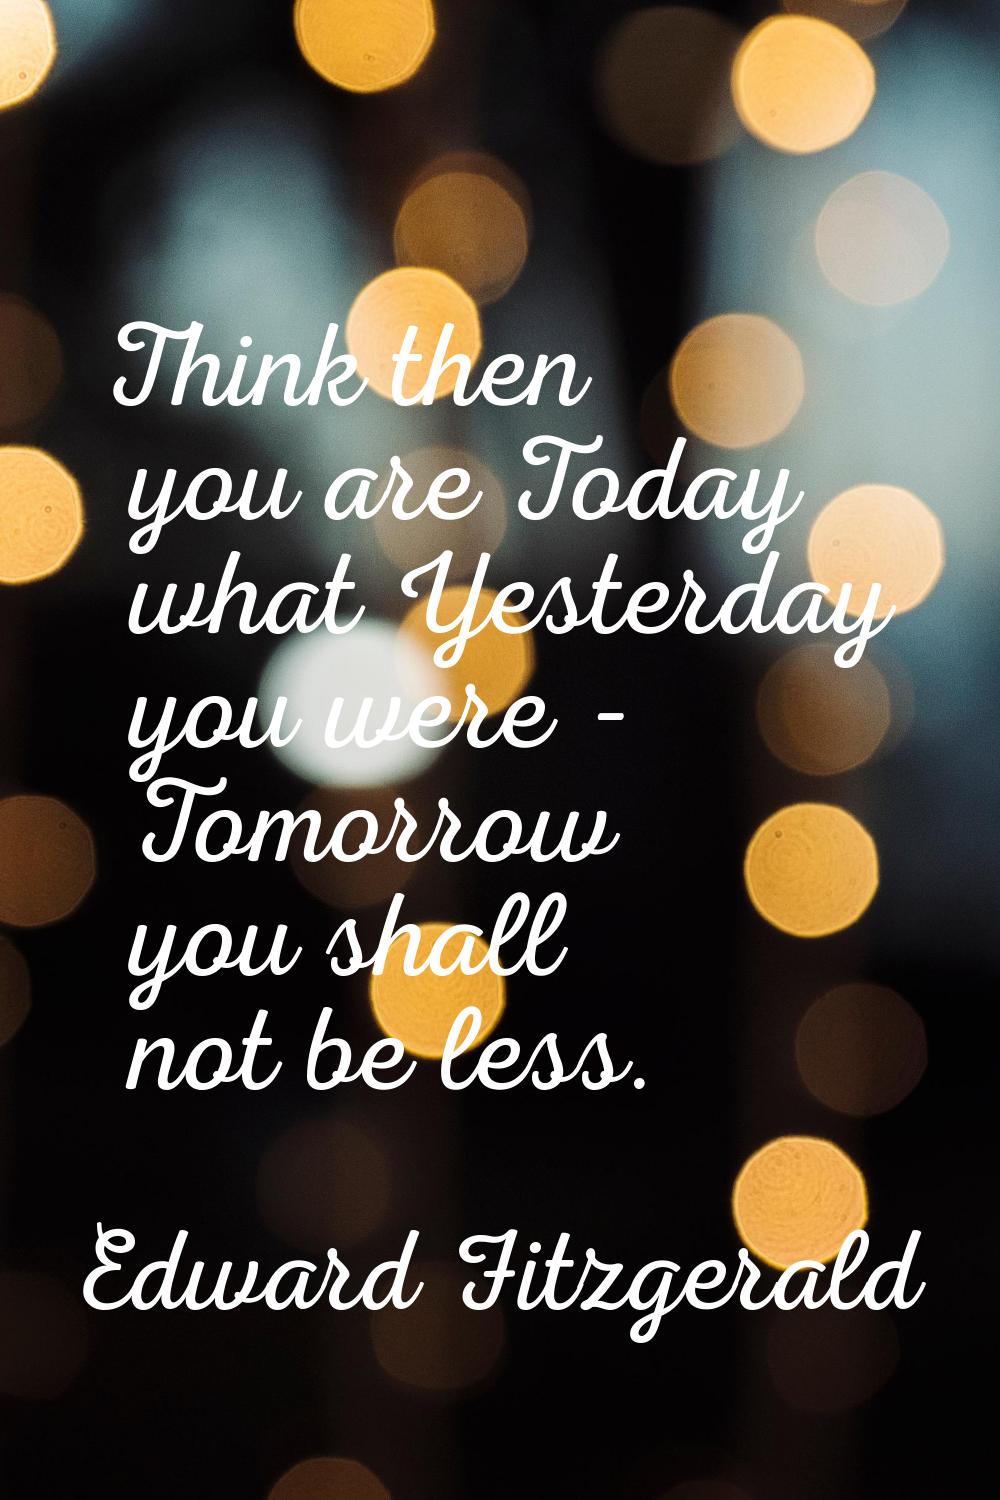 Think then you are Today what Yesterday you were - Tomorrow you shall not be less.